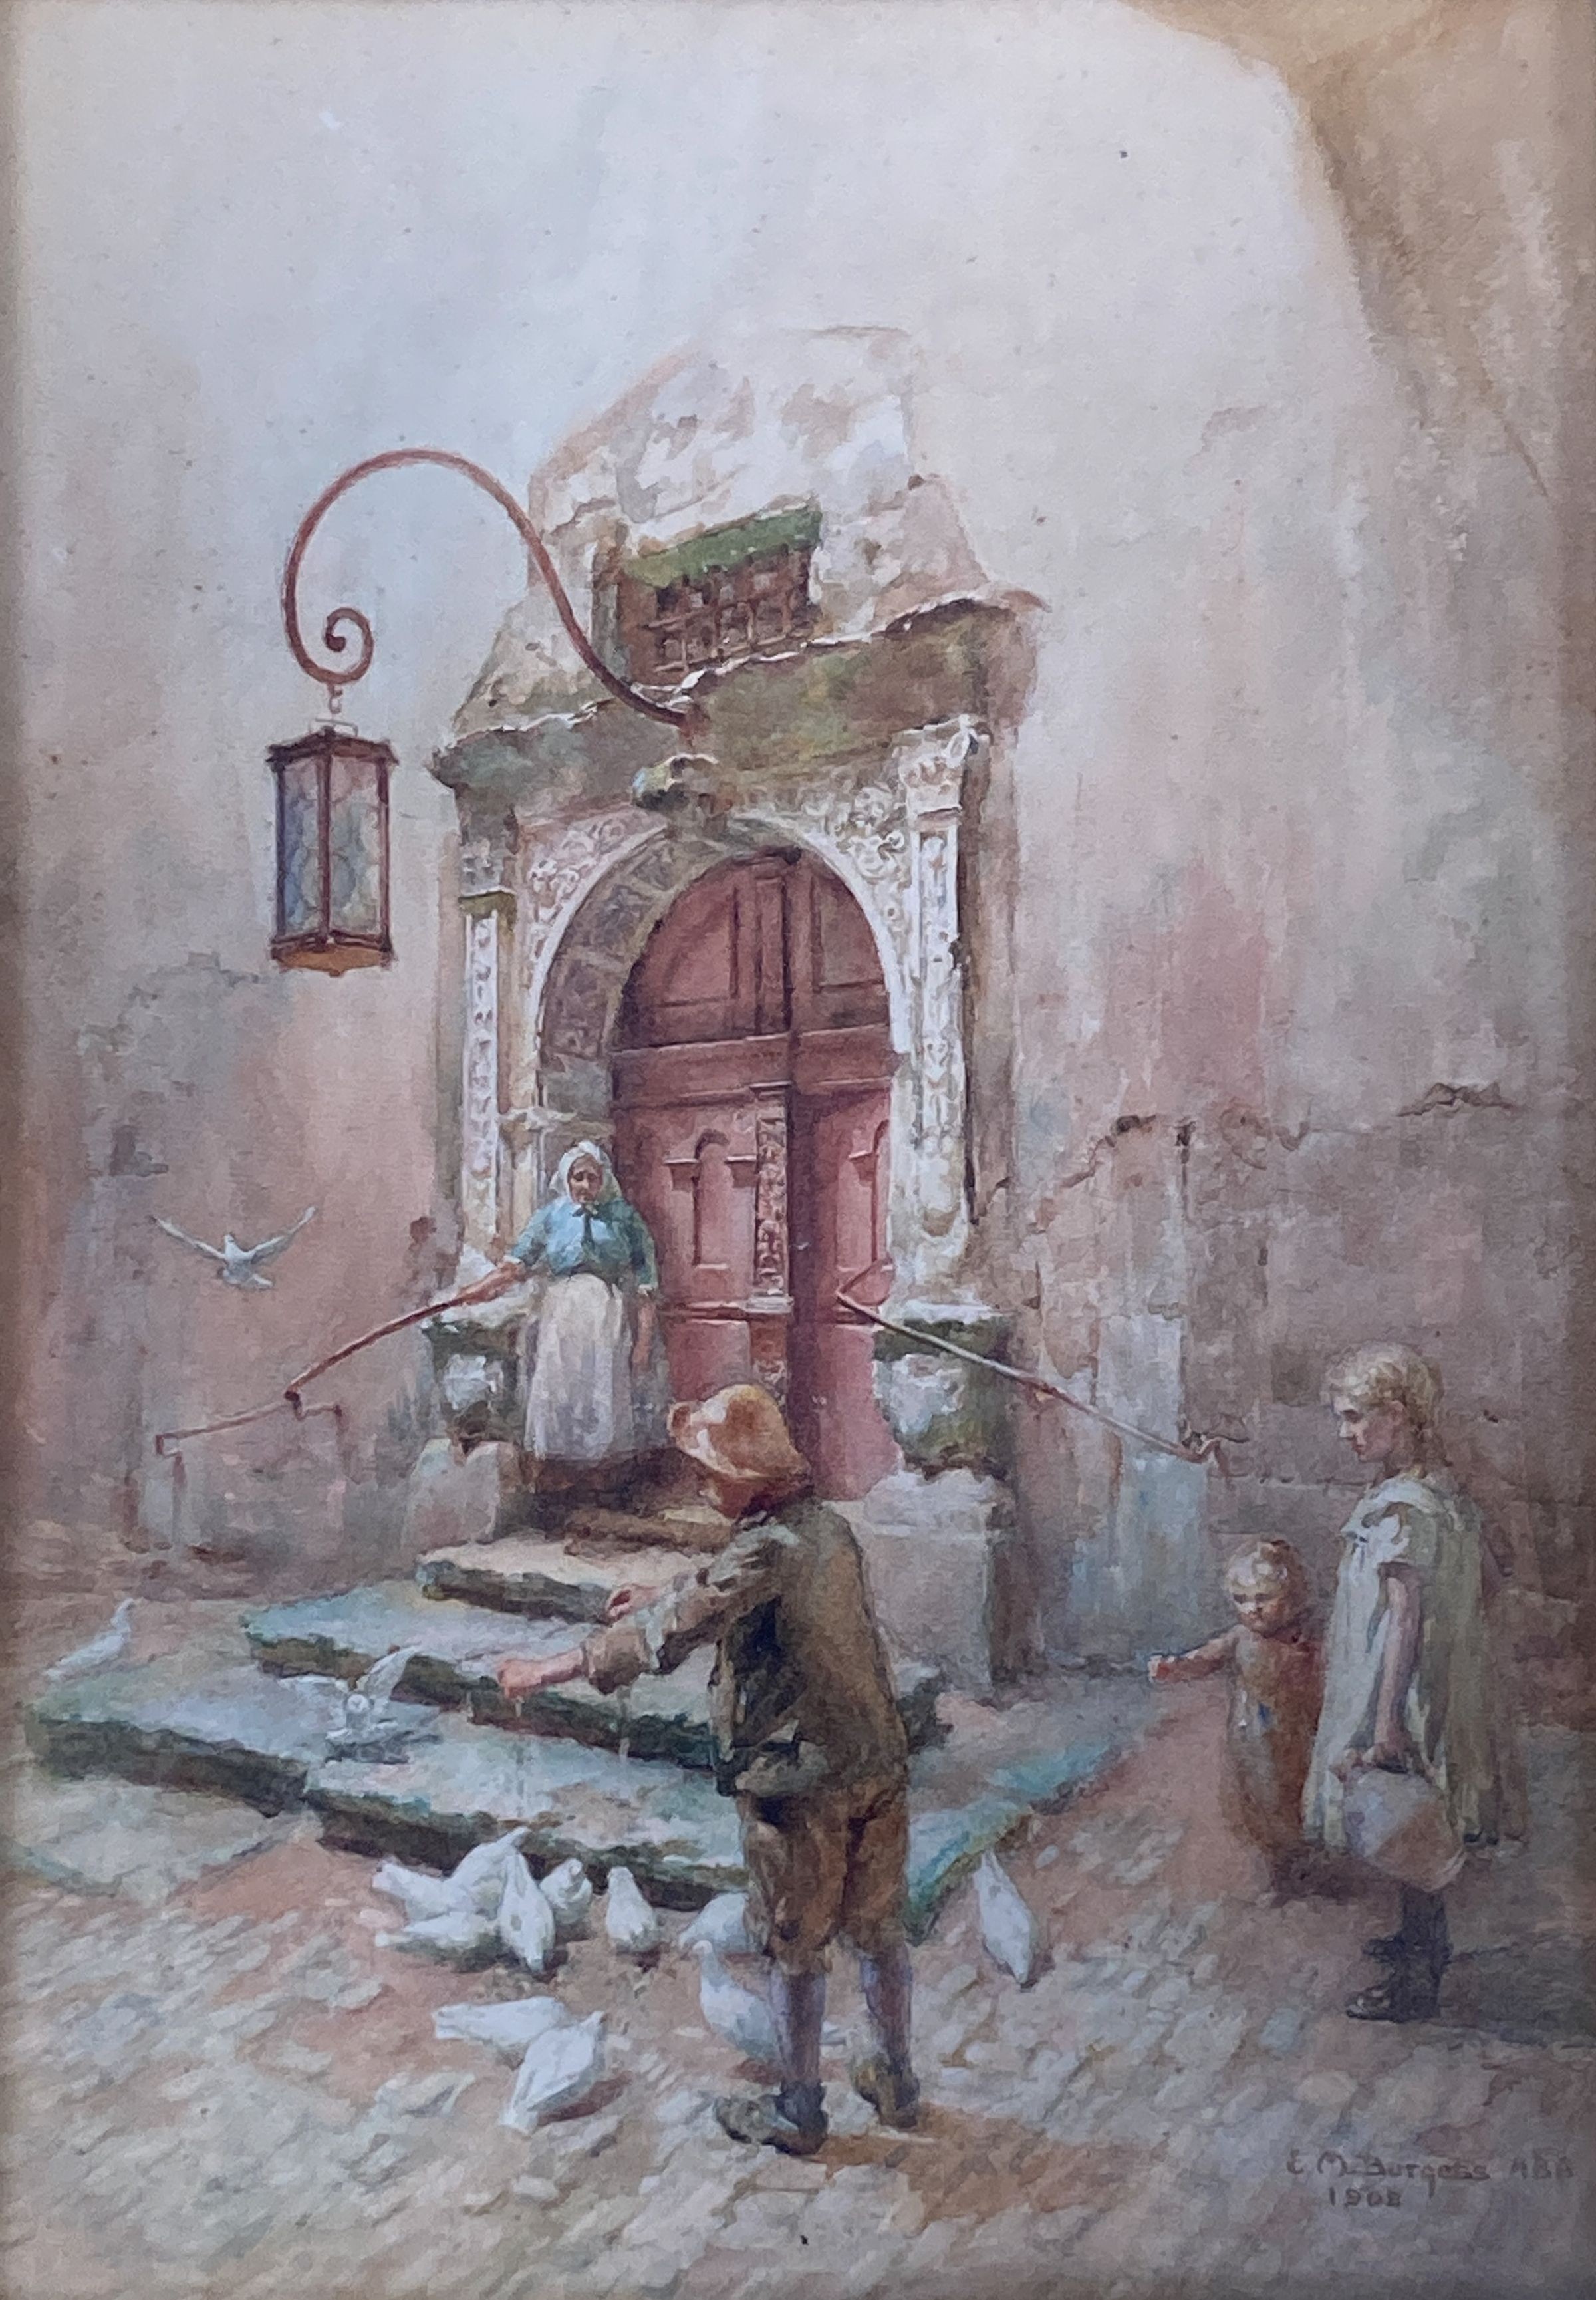 Eliza Mary Burgess (1878-1961), Children feeding doves, signed and dated 1908, watercolour, 46 x 33cm